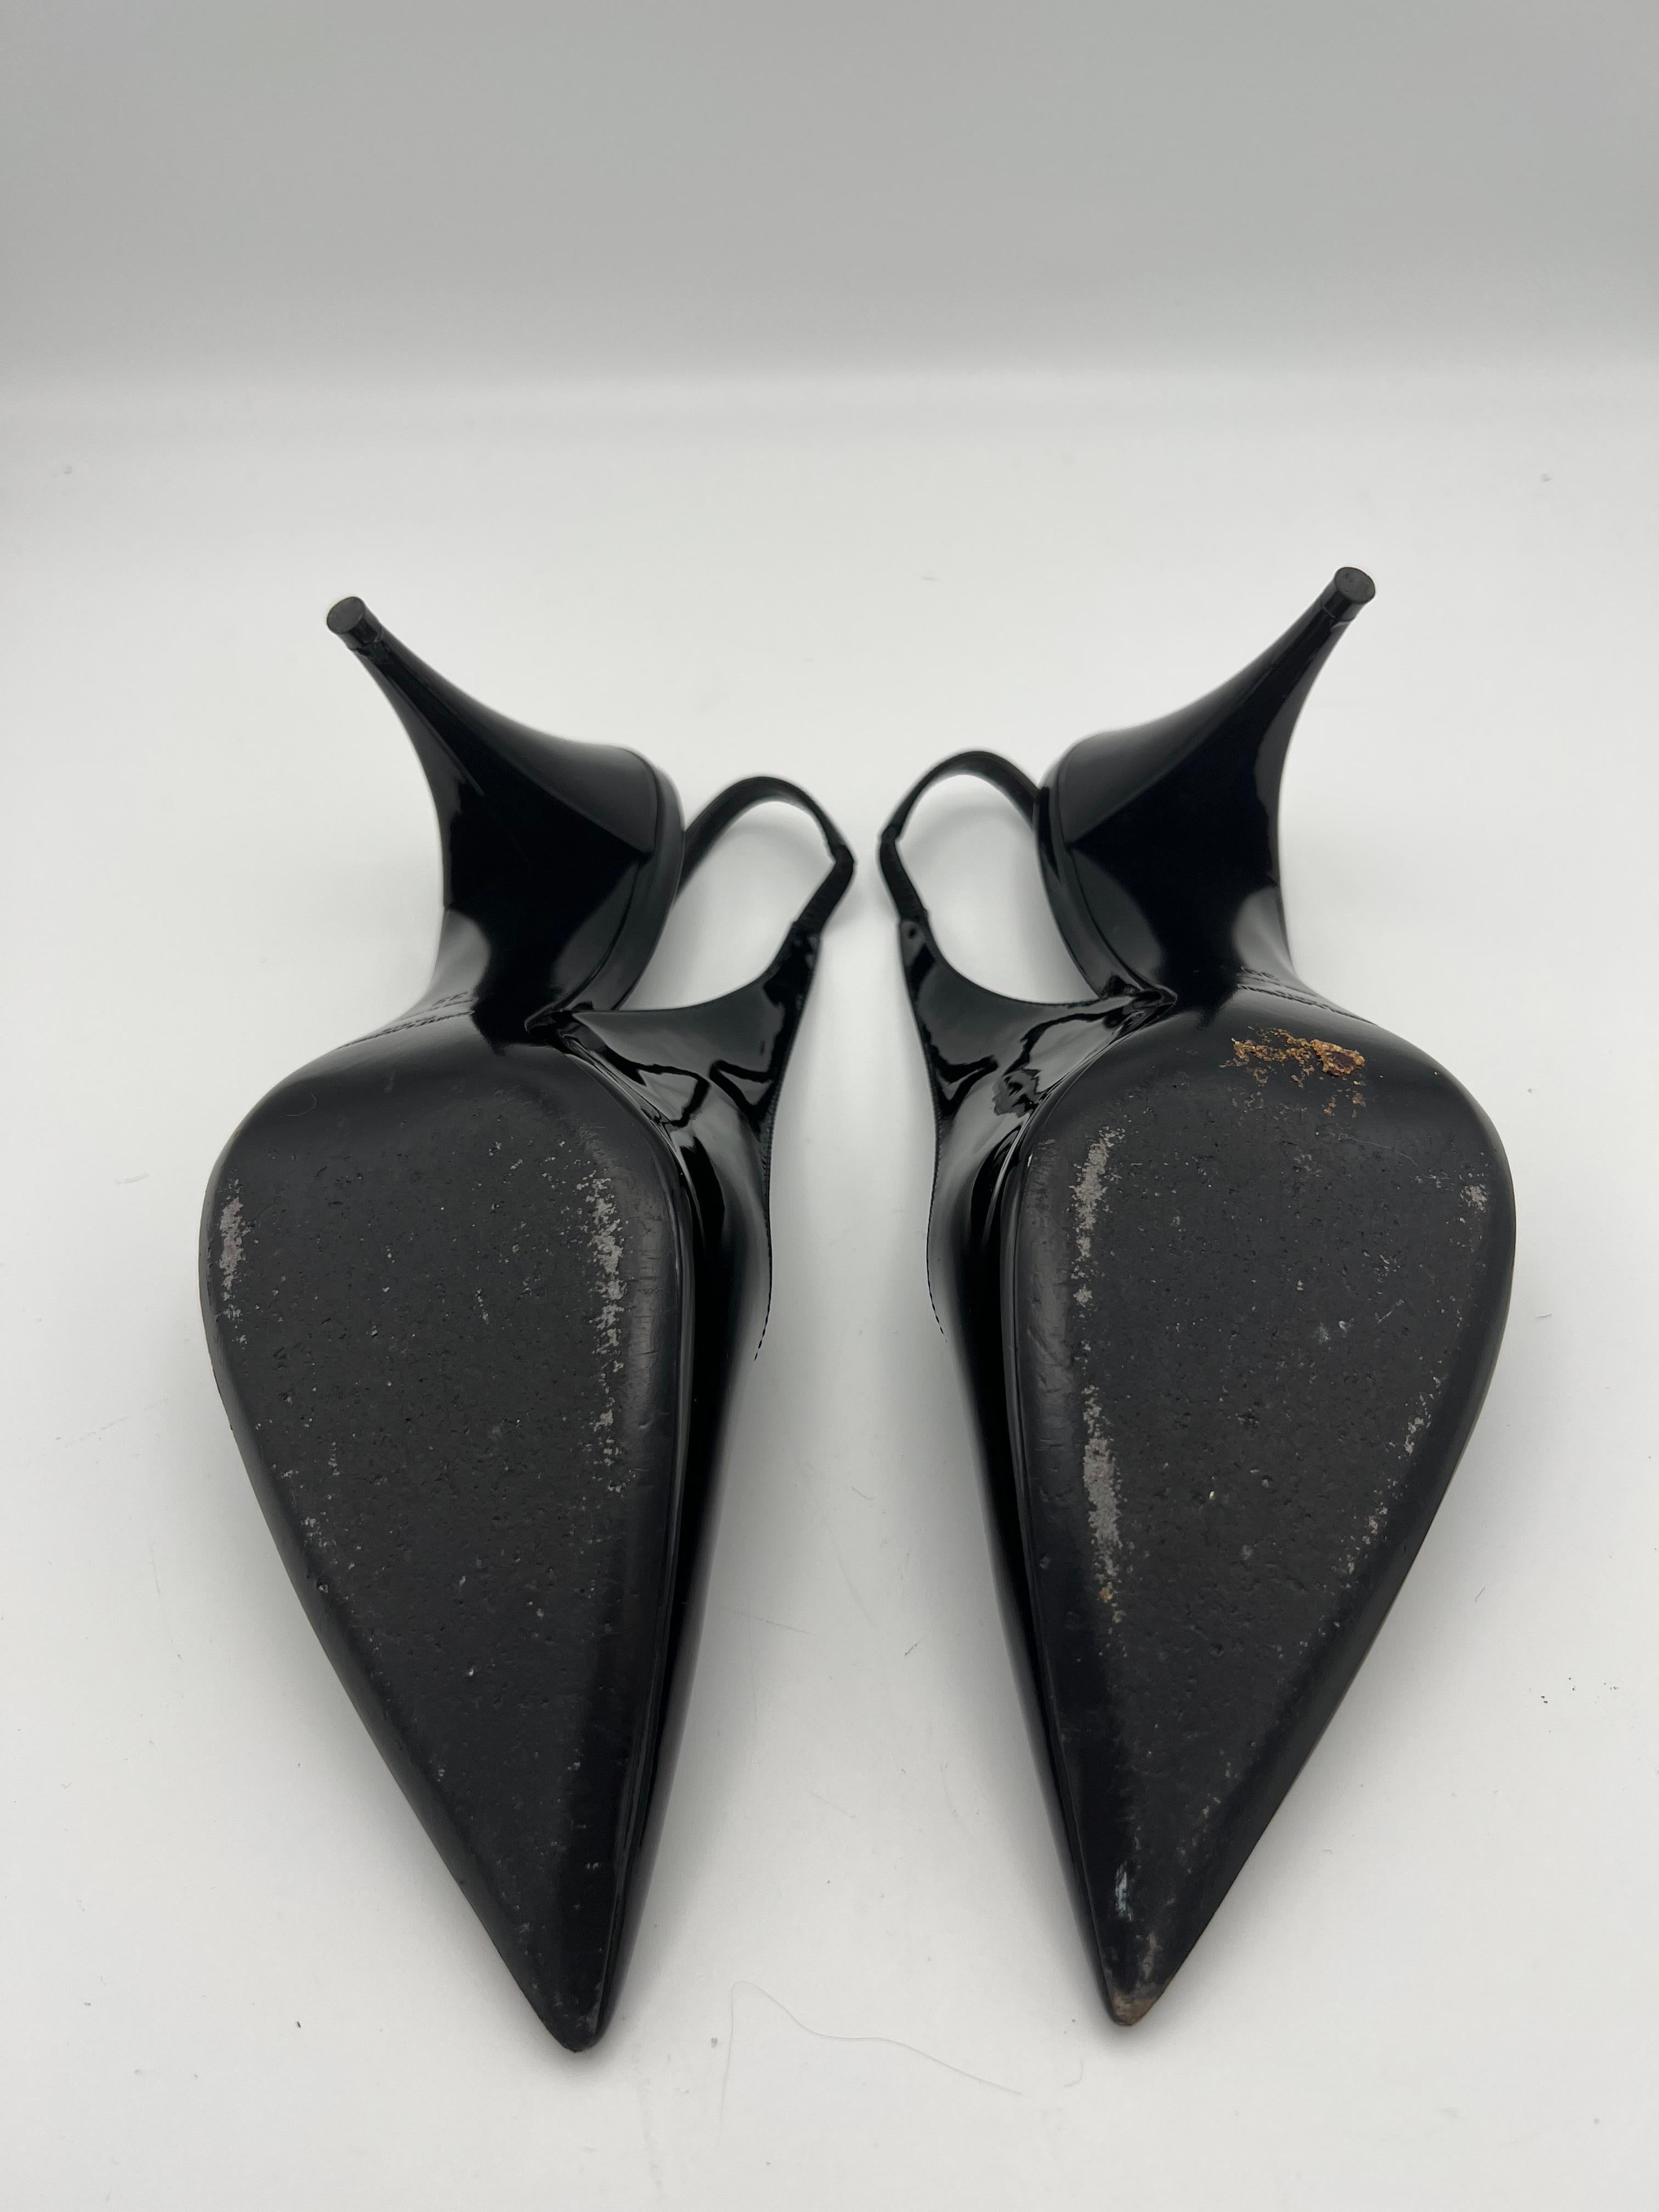 Saint Laurent Kiki Black Patent Pumps, Size 39 In Excellent Condition For Sale In Beverly Hills, CA